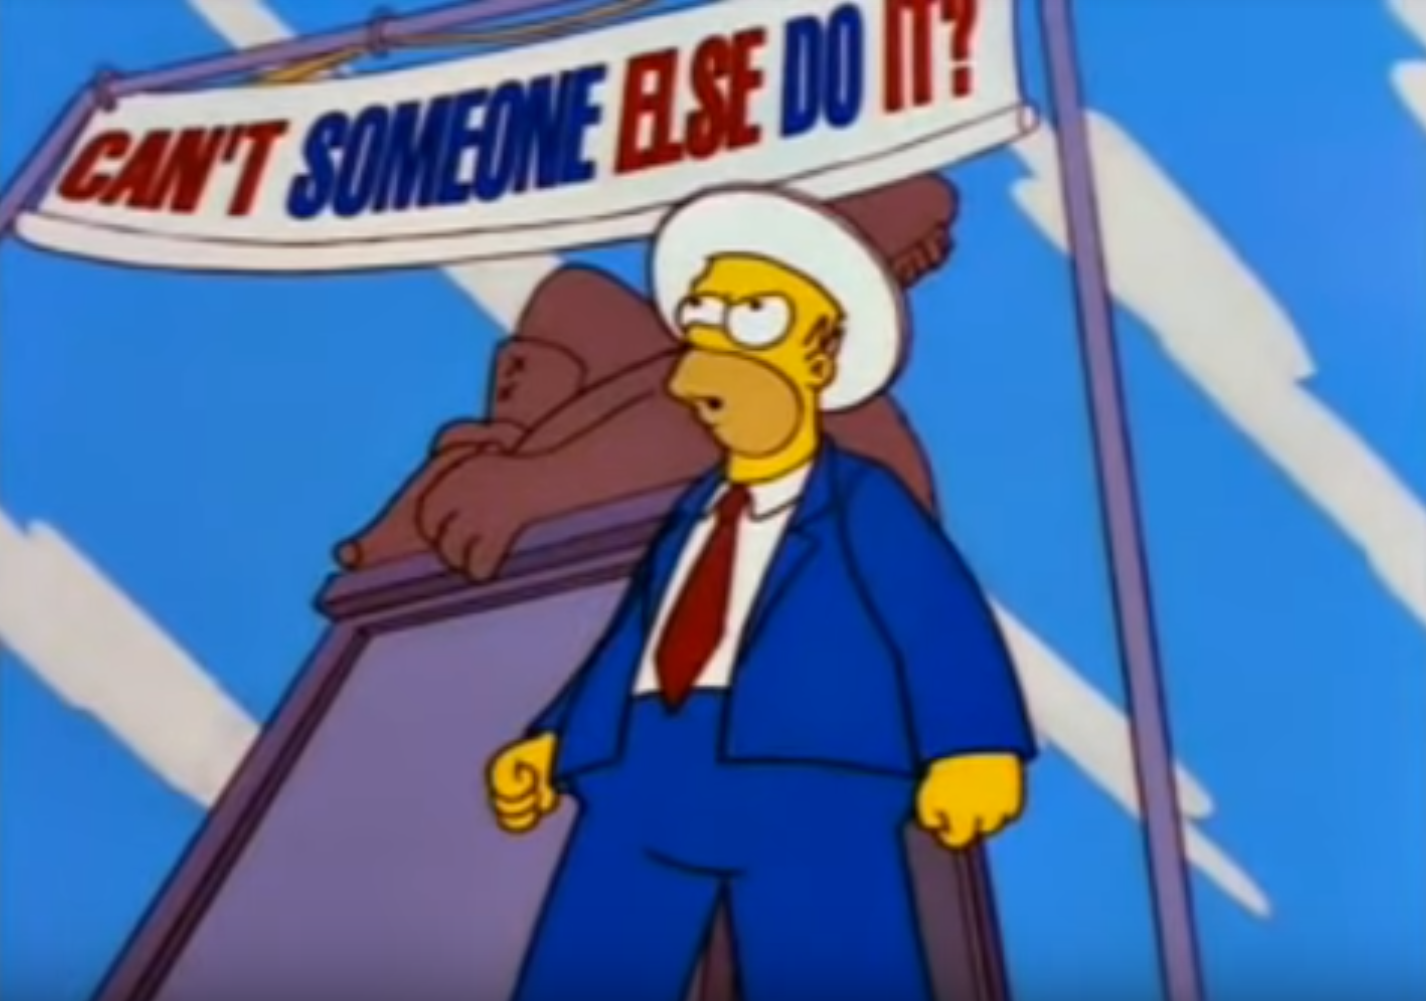 Homer Simpson touting: 'Can't SOMEONE else DO it?'